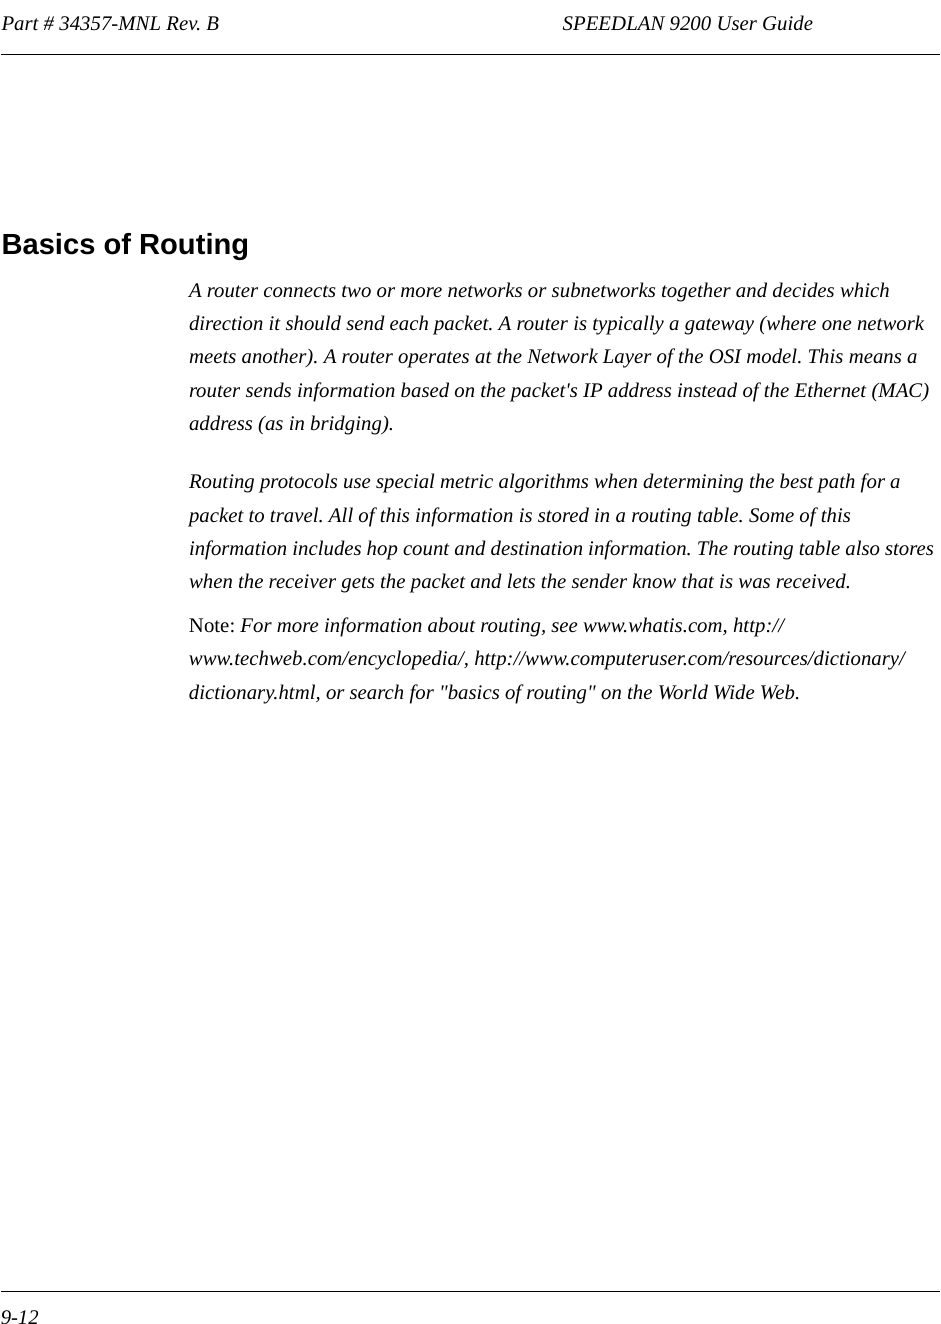 Part # 34357-MNL Rev. B                                                                  SPEEDLAN 9200 User Guide 9-12Basics of RoutingA router connects two or more networks or subnetworks together and decides which direction it should send each packet. A router is typically a gateway (where one network meets another). A router operates at the Network Layer of the OSI model. This means a router sends information based on the packet&apos;s IP address instead of the Ethernet (MAC) address (as in bridging).Routing protocols use special metric algorithms when determining the best path for a packet to travel. All of this information is stored in a routing table. Some of this information includes hop count and destination information. The routing table also stores when the receiver gets the packet and lets the sender know that is was received.Note: For more information about routing, see www.whatis.com, http://www.techweb.com/encyclopedia/, http://www.computeruser.com/resources/dictionary/dictionary.html, or search for &quot;basics of routing&quot; on the World Wide Web.  